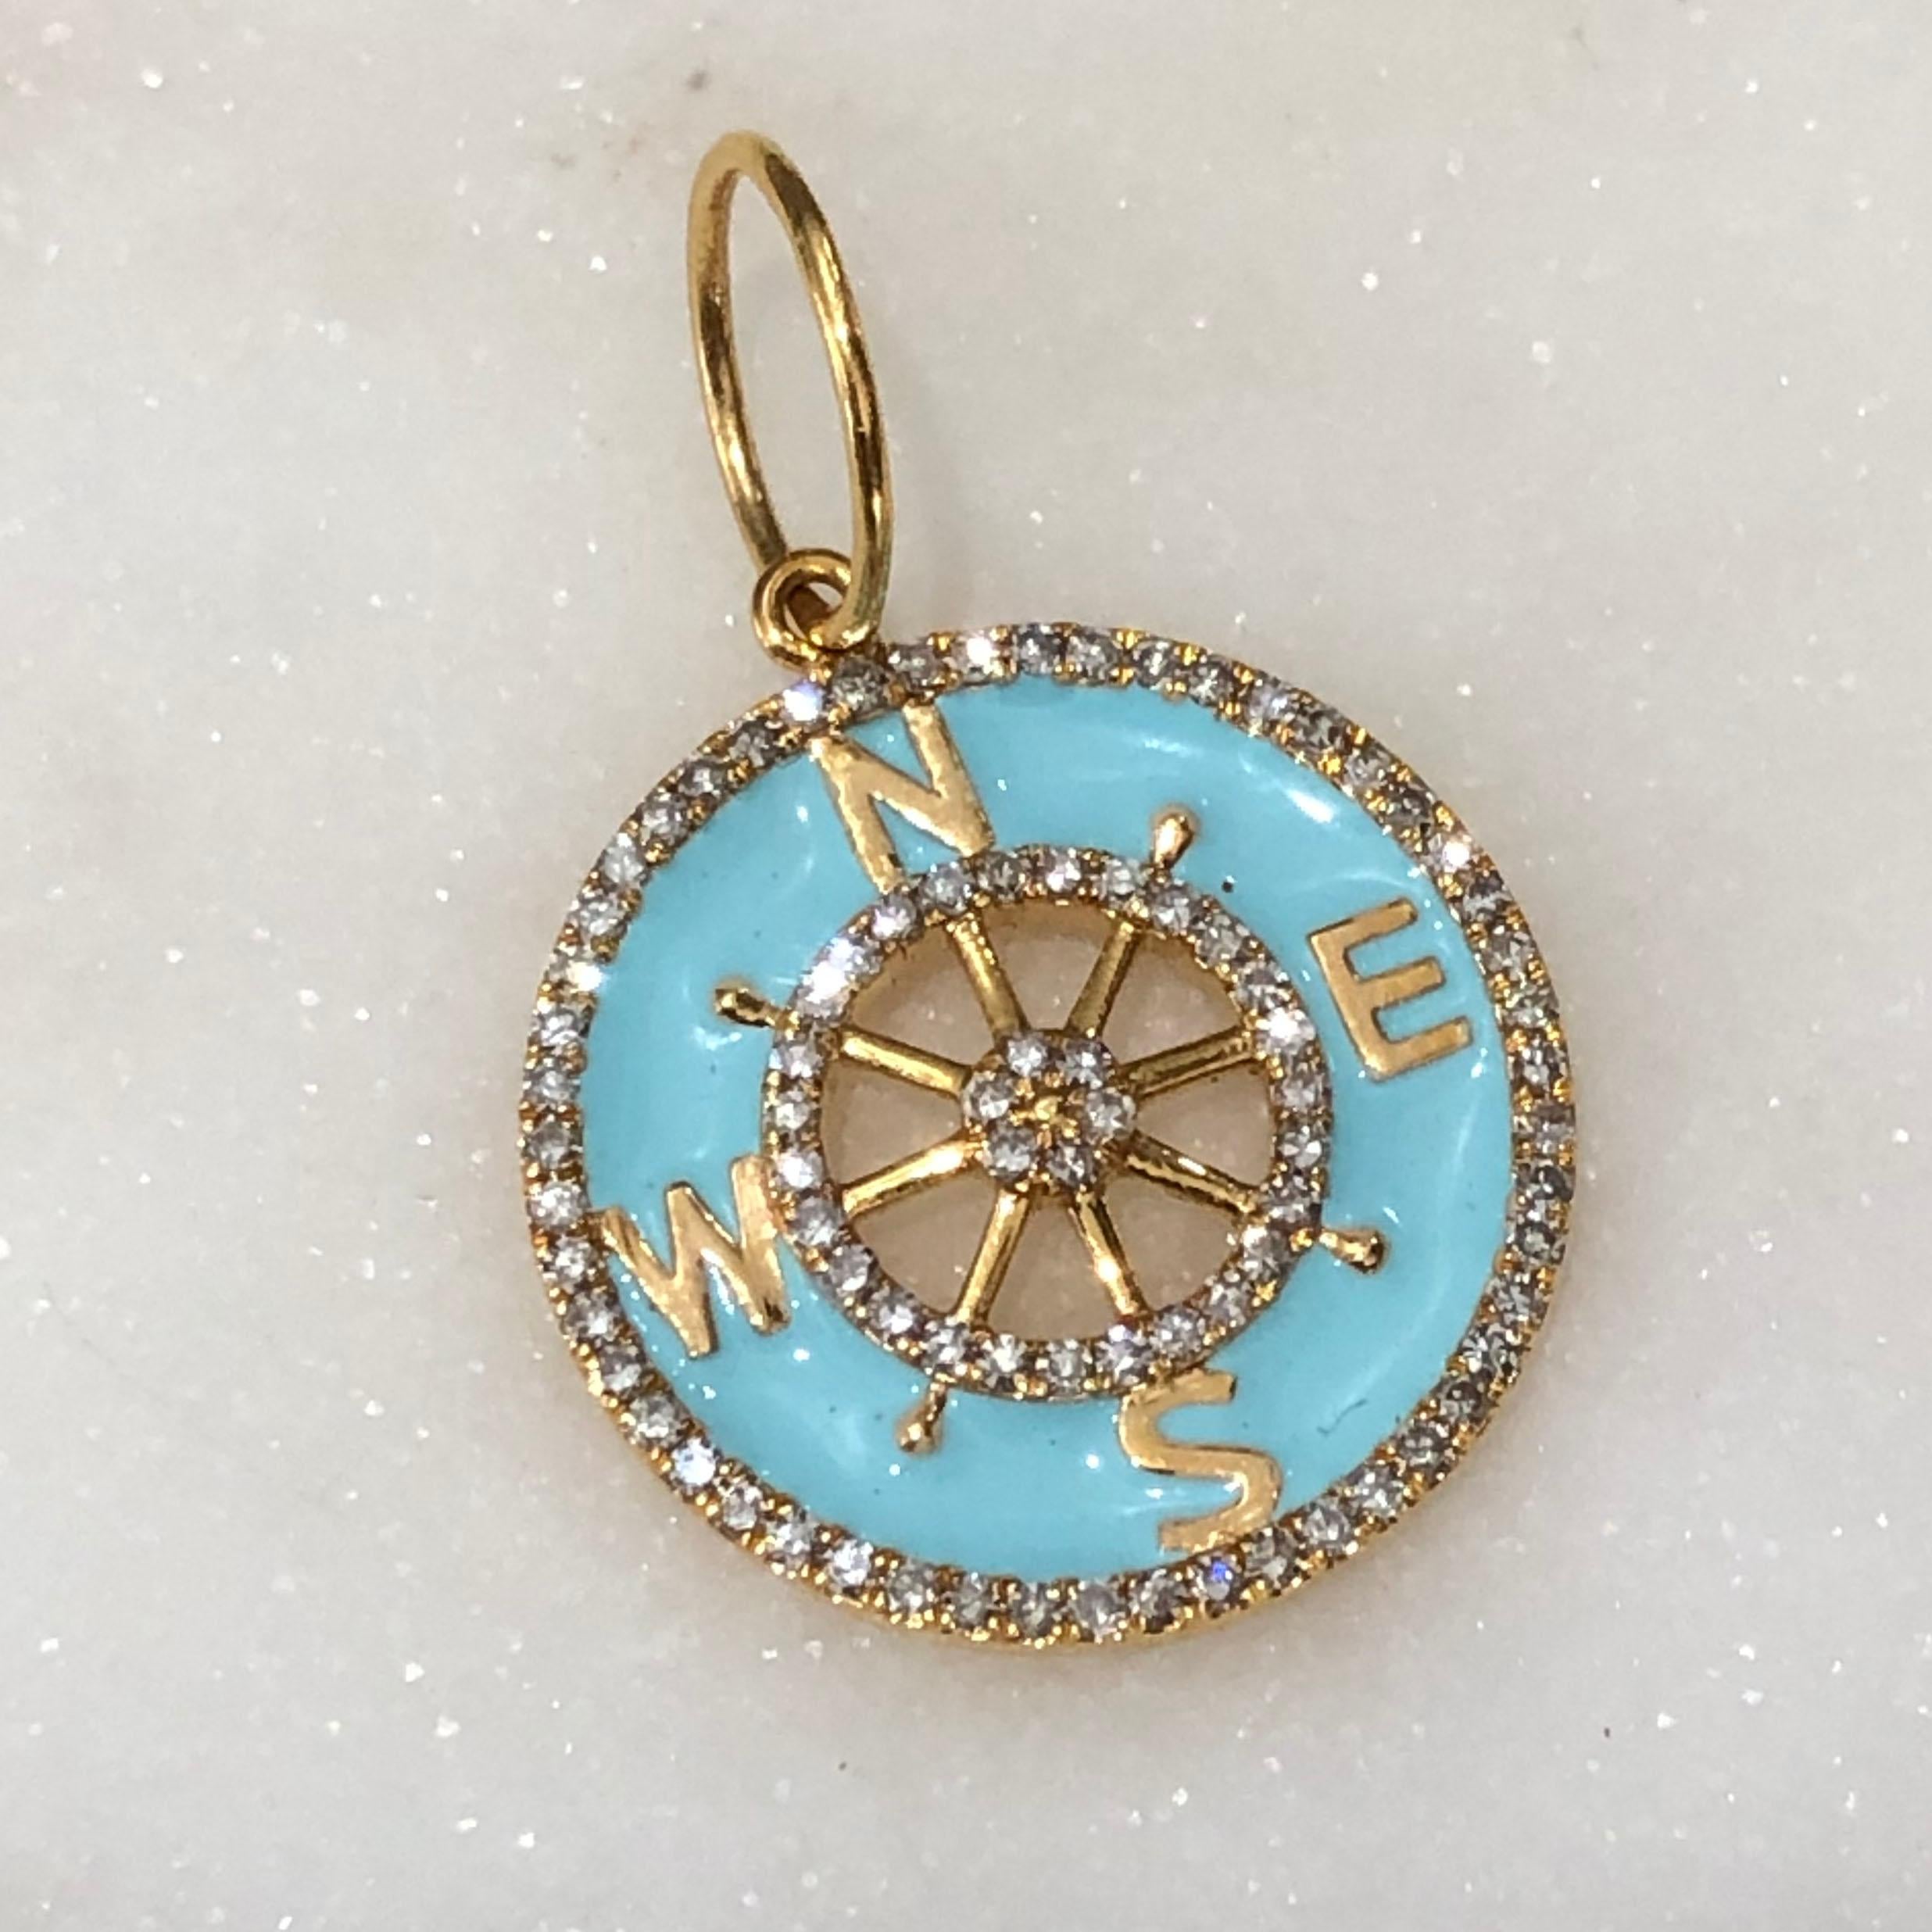 Finely detailed diamond compass charm crafted in 14k yellow gold.  

Diamonds total an estimated 0.30 carats (estimated at H-I color and VS2-SI2 clarity).
The finely detailed charm features egg shell blue enamel with compass points to North, South